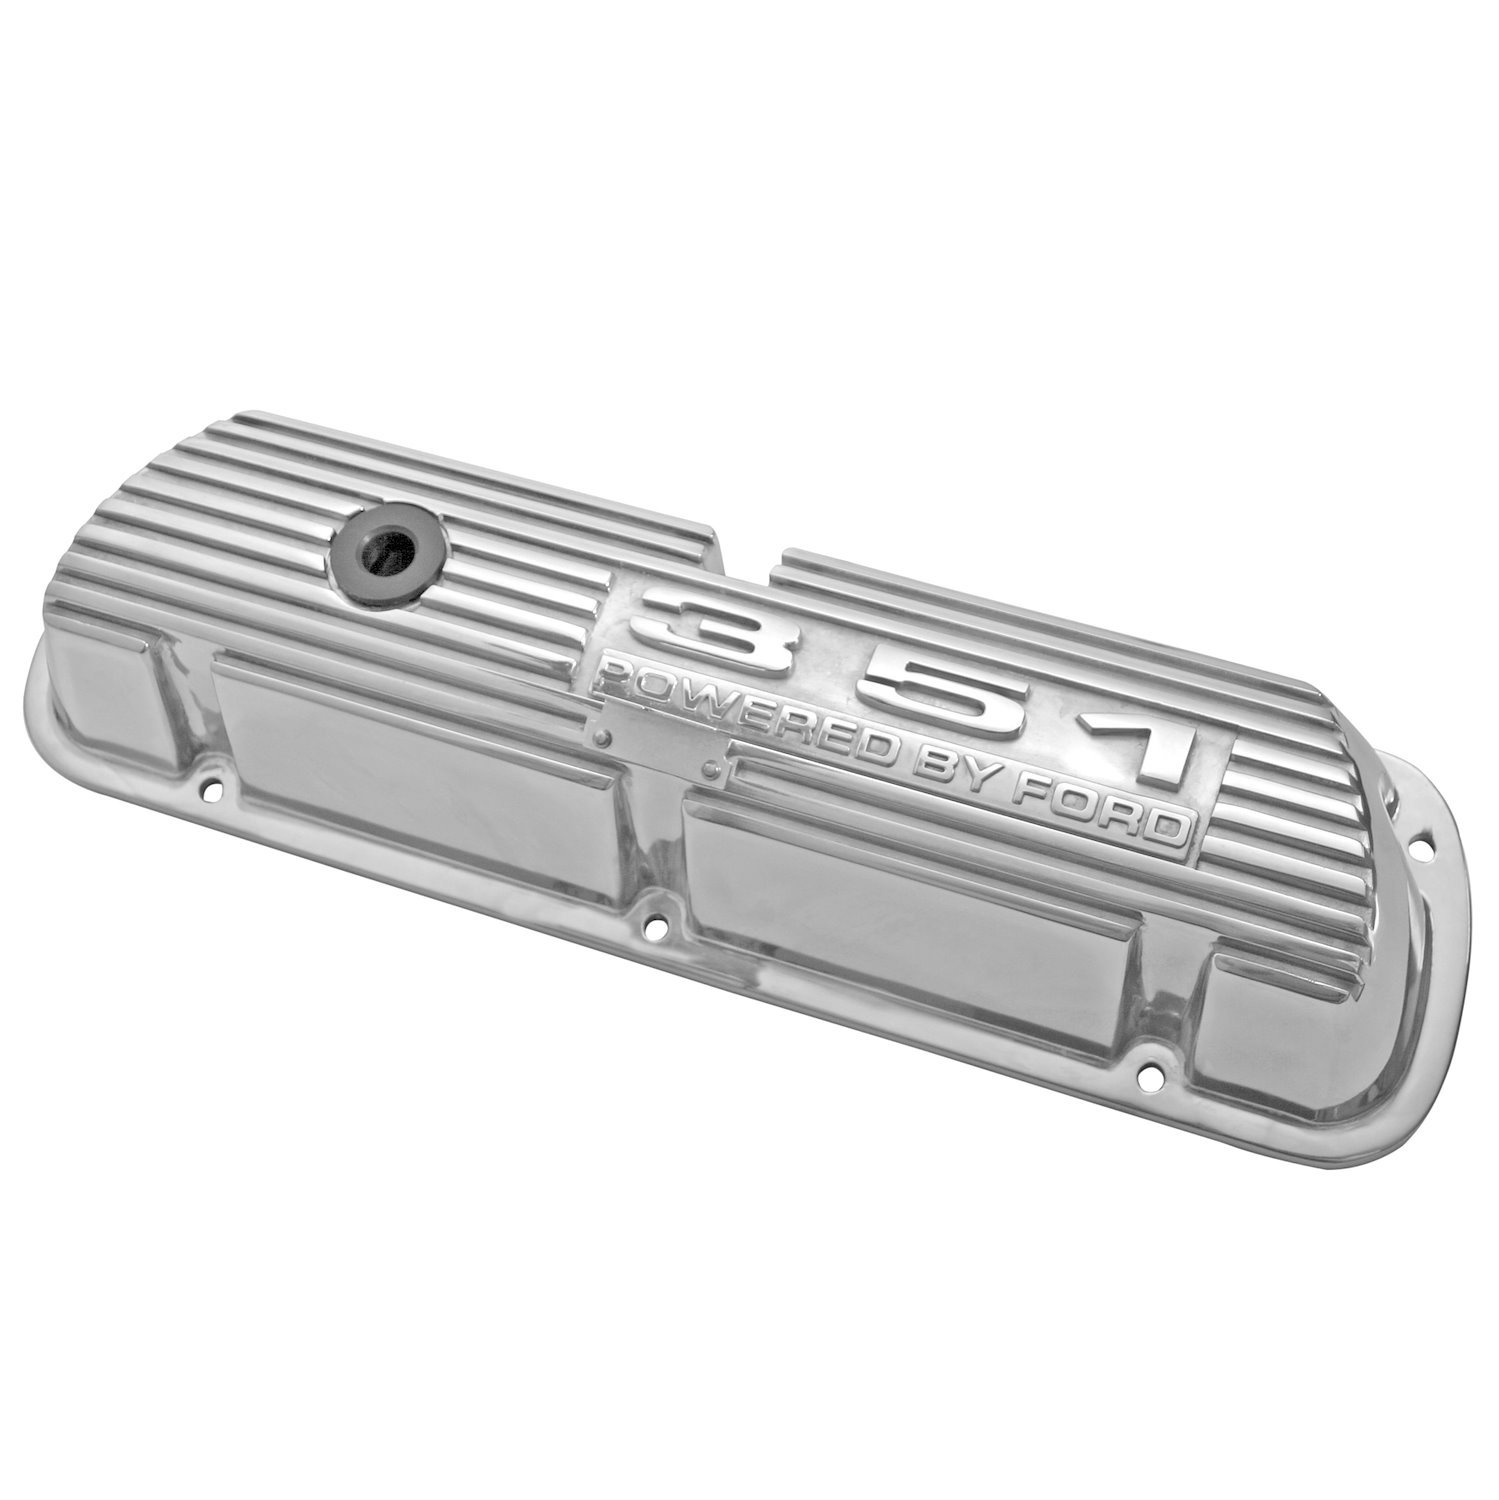 Custom Valve Covers for Ford 351 Engines